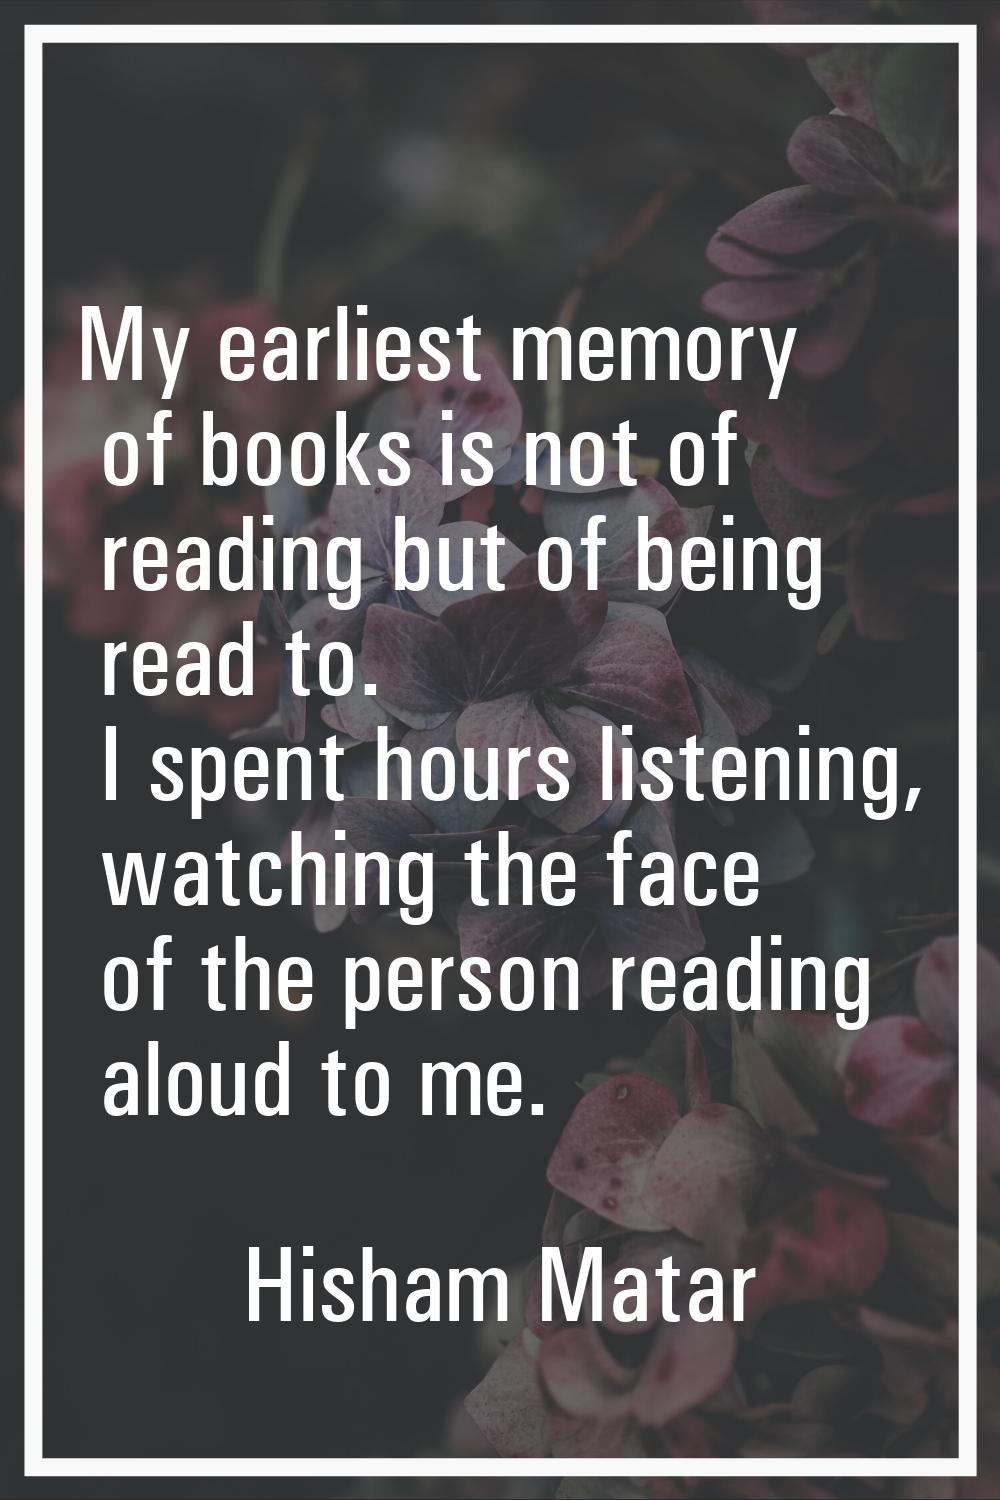 My earliest memory of books is not of reading but of being read to. I spent hours listening, watchi